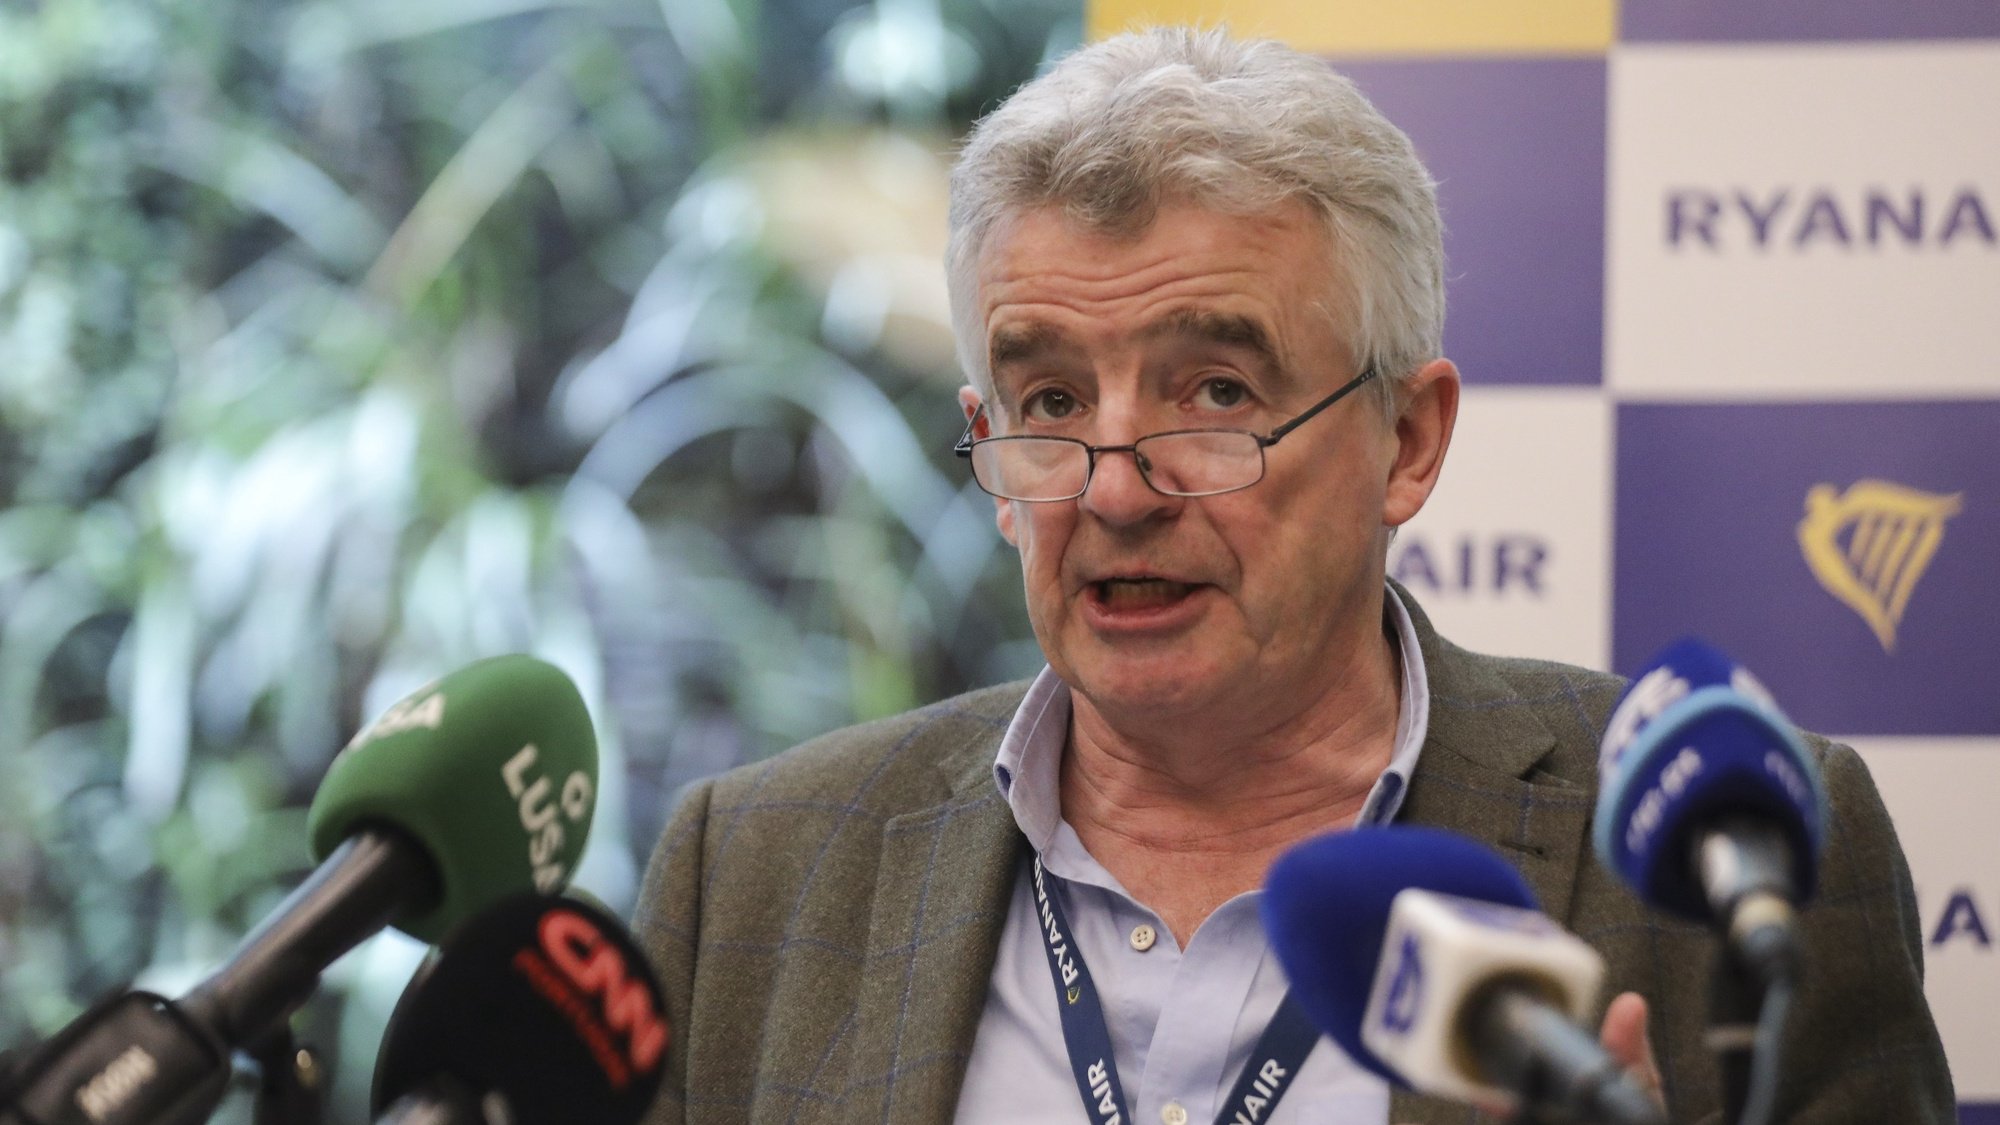 Ryanair CEO Michael O&#039;Leary attends a press conference of Ryanair Group in Lisbon, Portugal, 16 February 2022. Ryanair&#039;s CEO, Michael O&#039;Leary, said today that the Irish airline may have to give up 20 routes in Lisbon this summer due to TAP&#039;s accumulation of unused slots. MIGUEL A. LOPES/LUSA